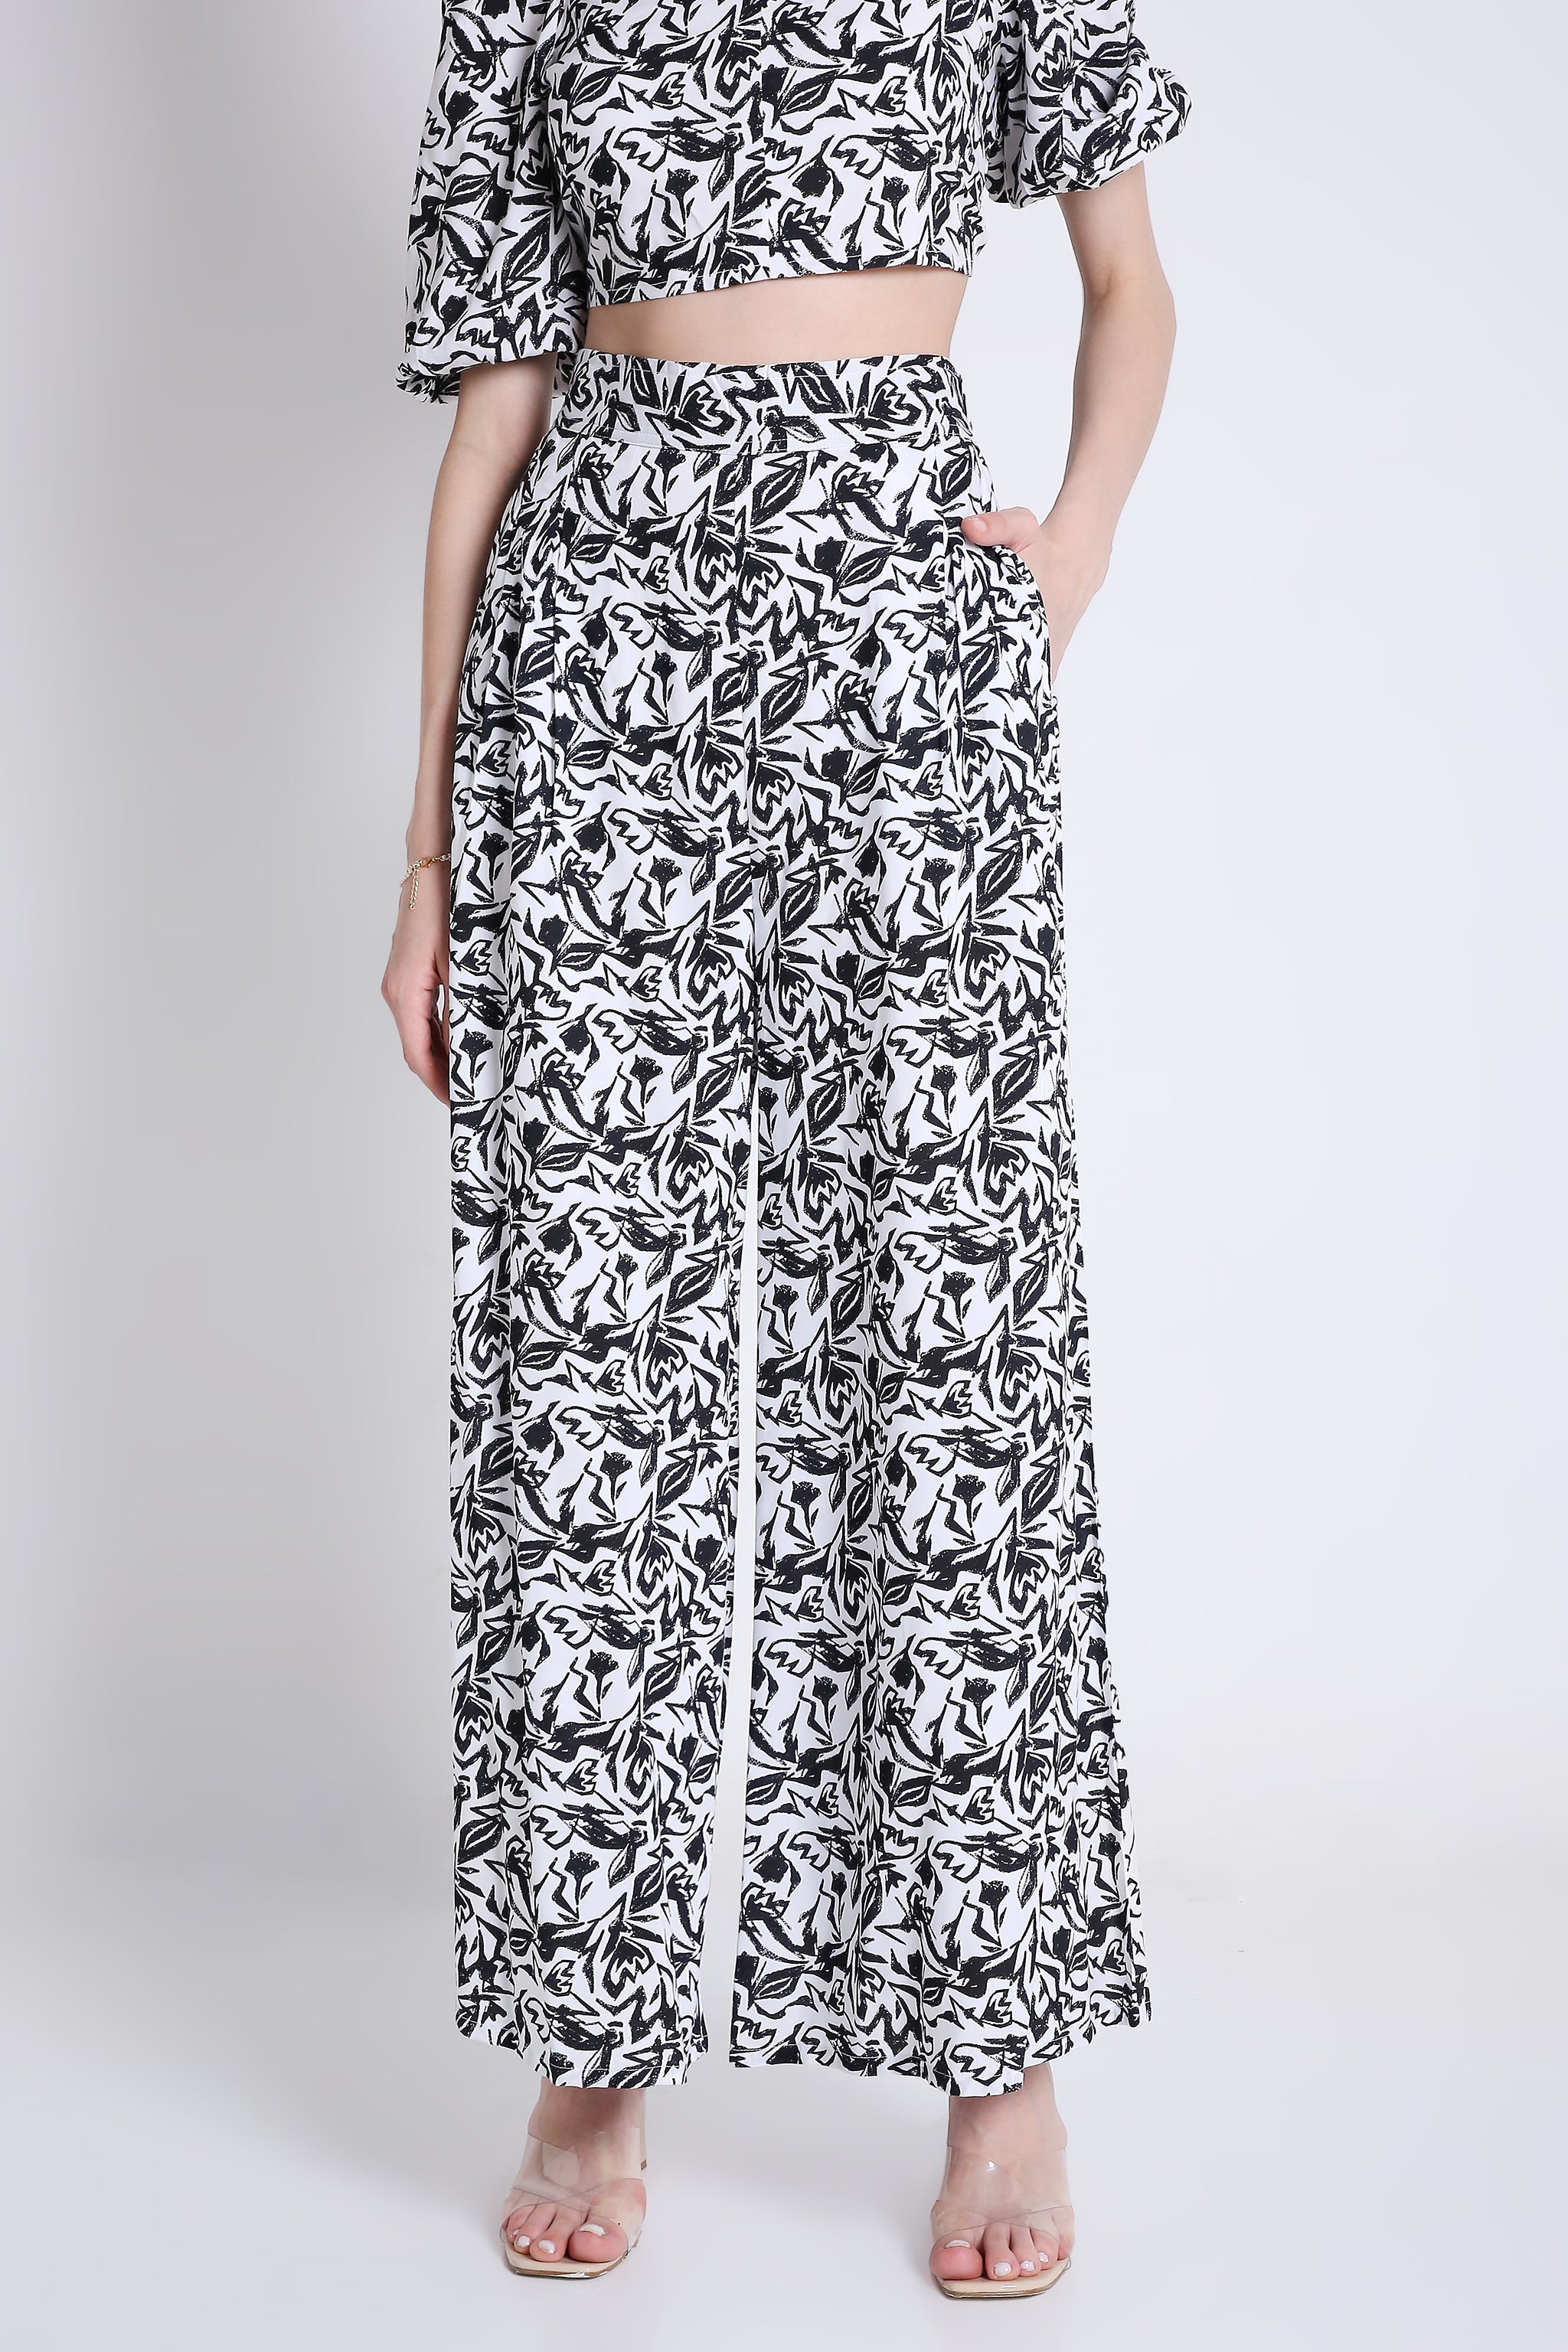 White and Black Printed Flared Co-Ord Set Pant